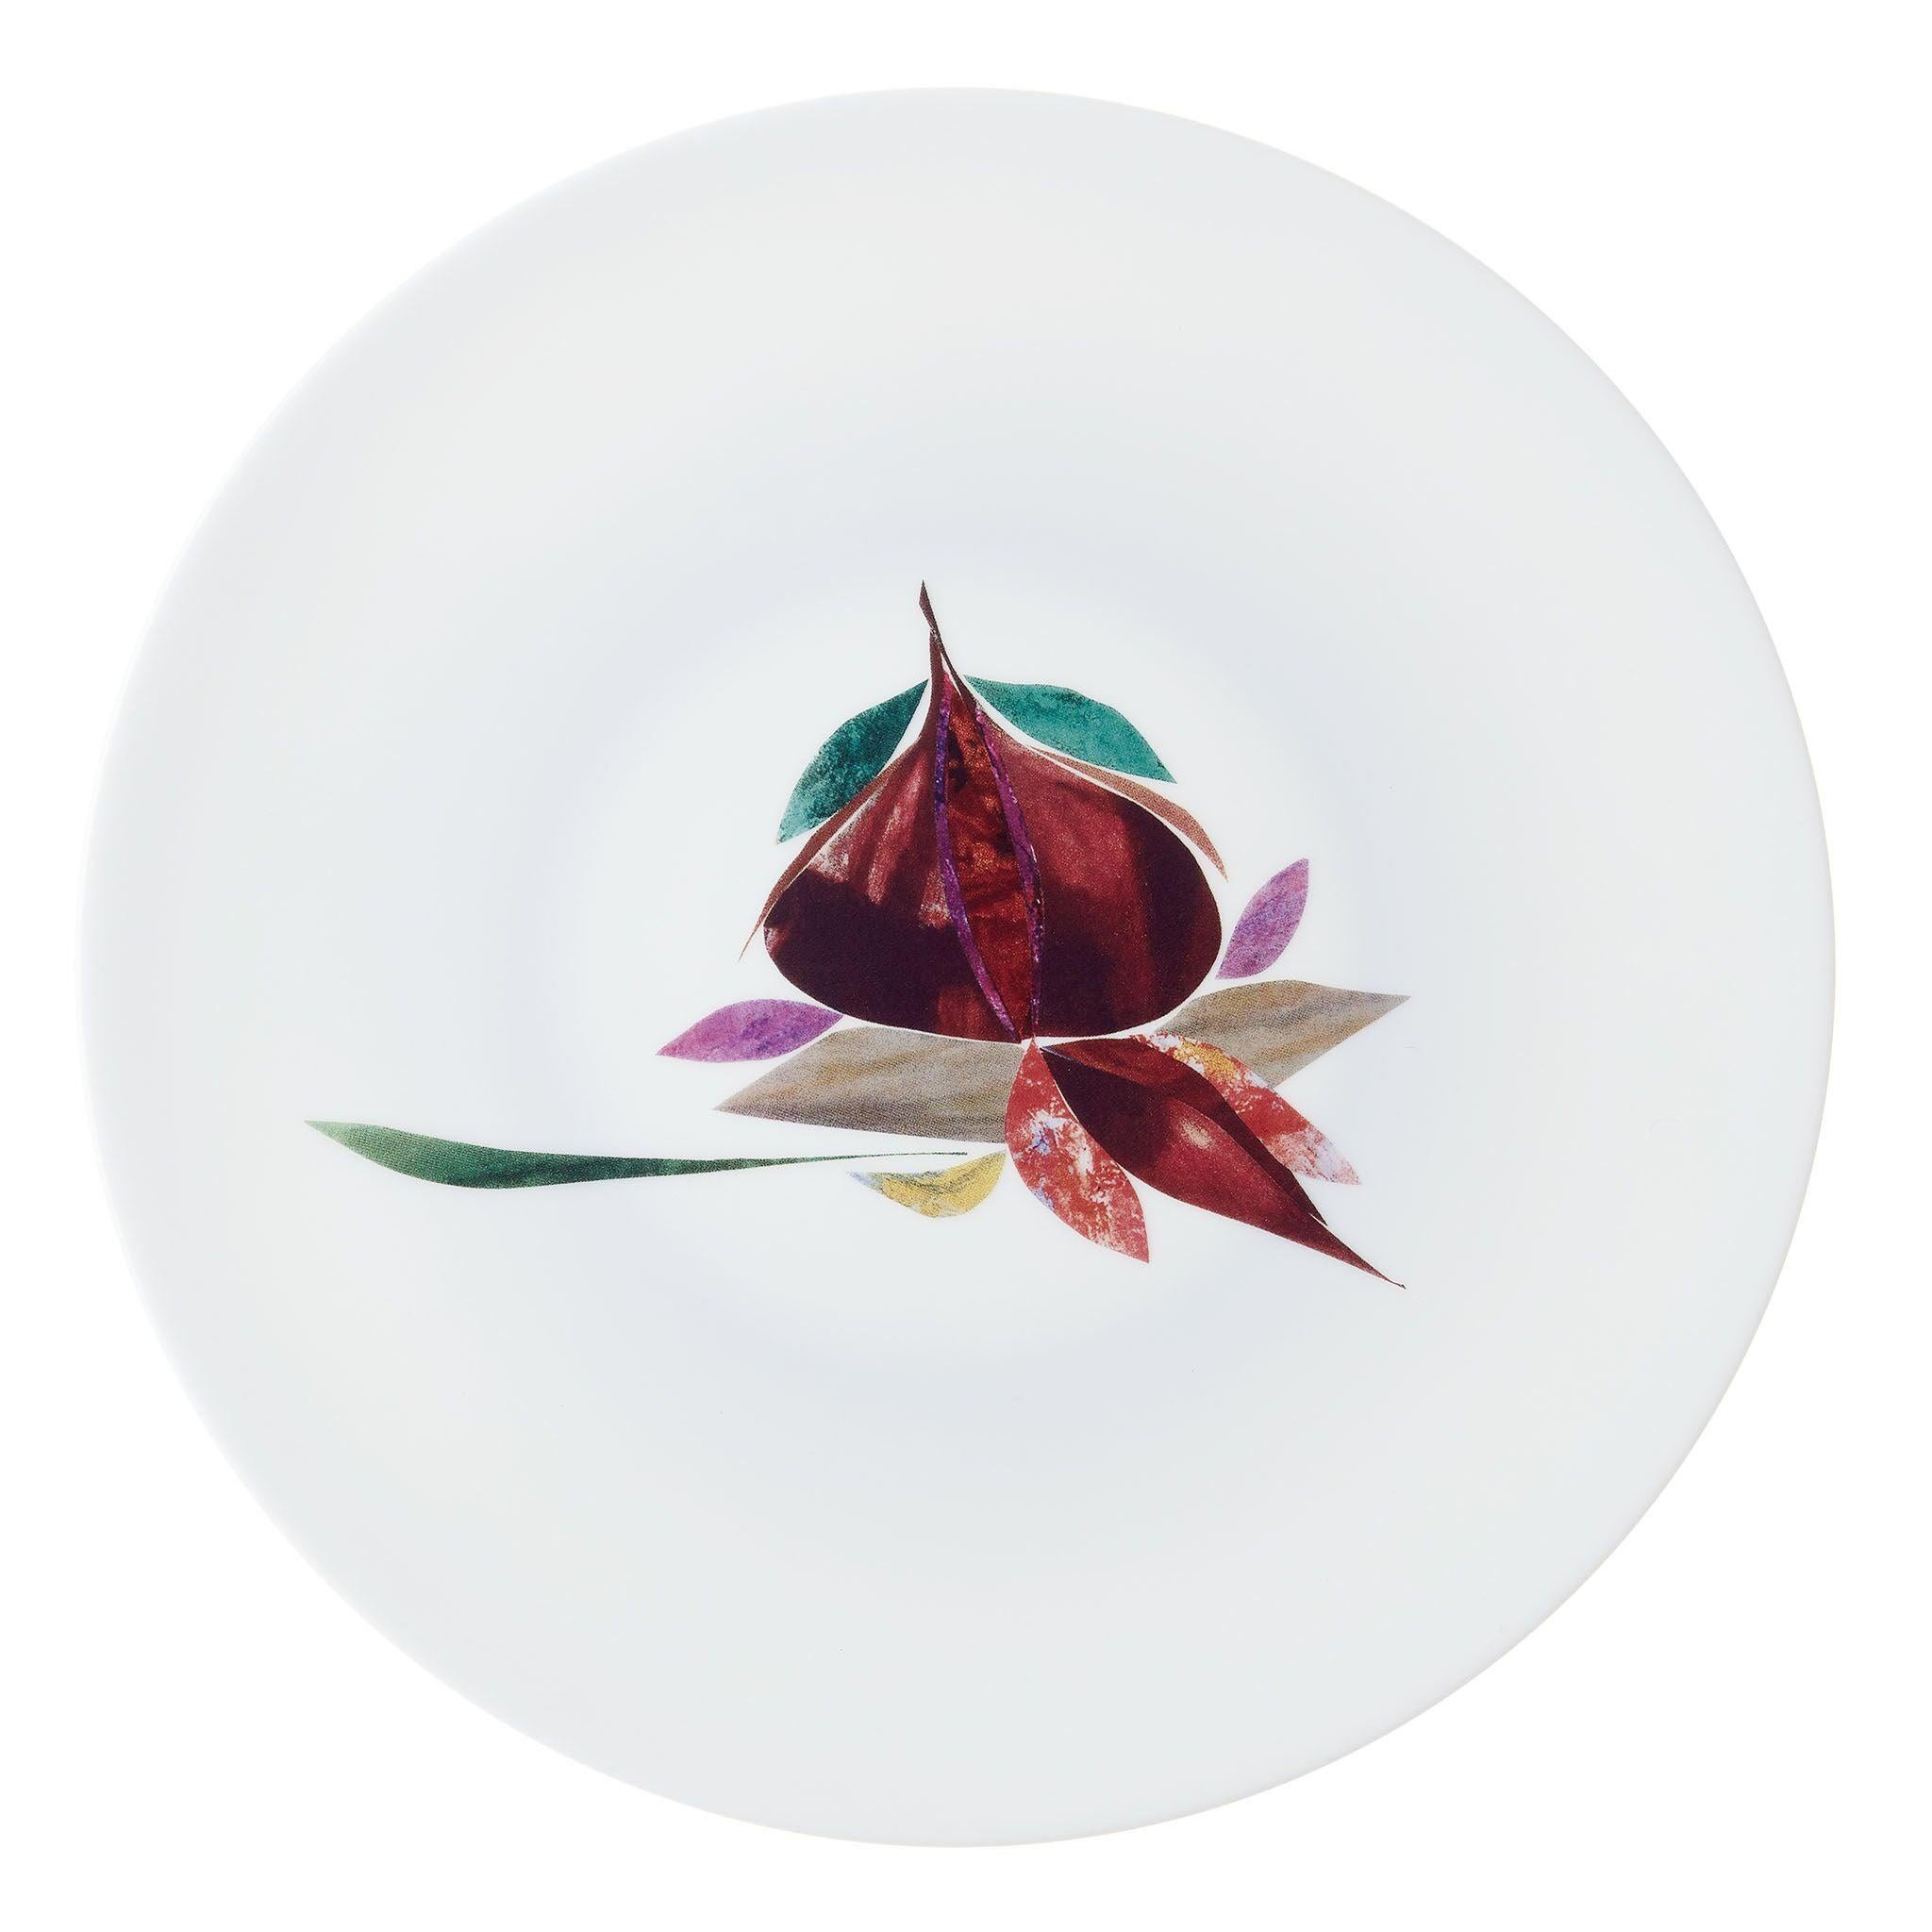 Dinner Porcelain Plate by the French Chef Alain Passard Model " Fig"